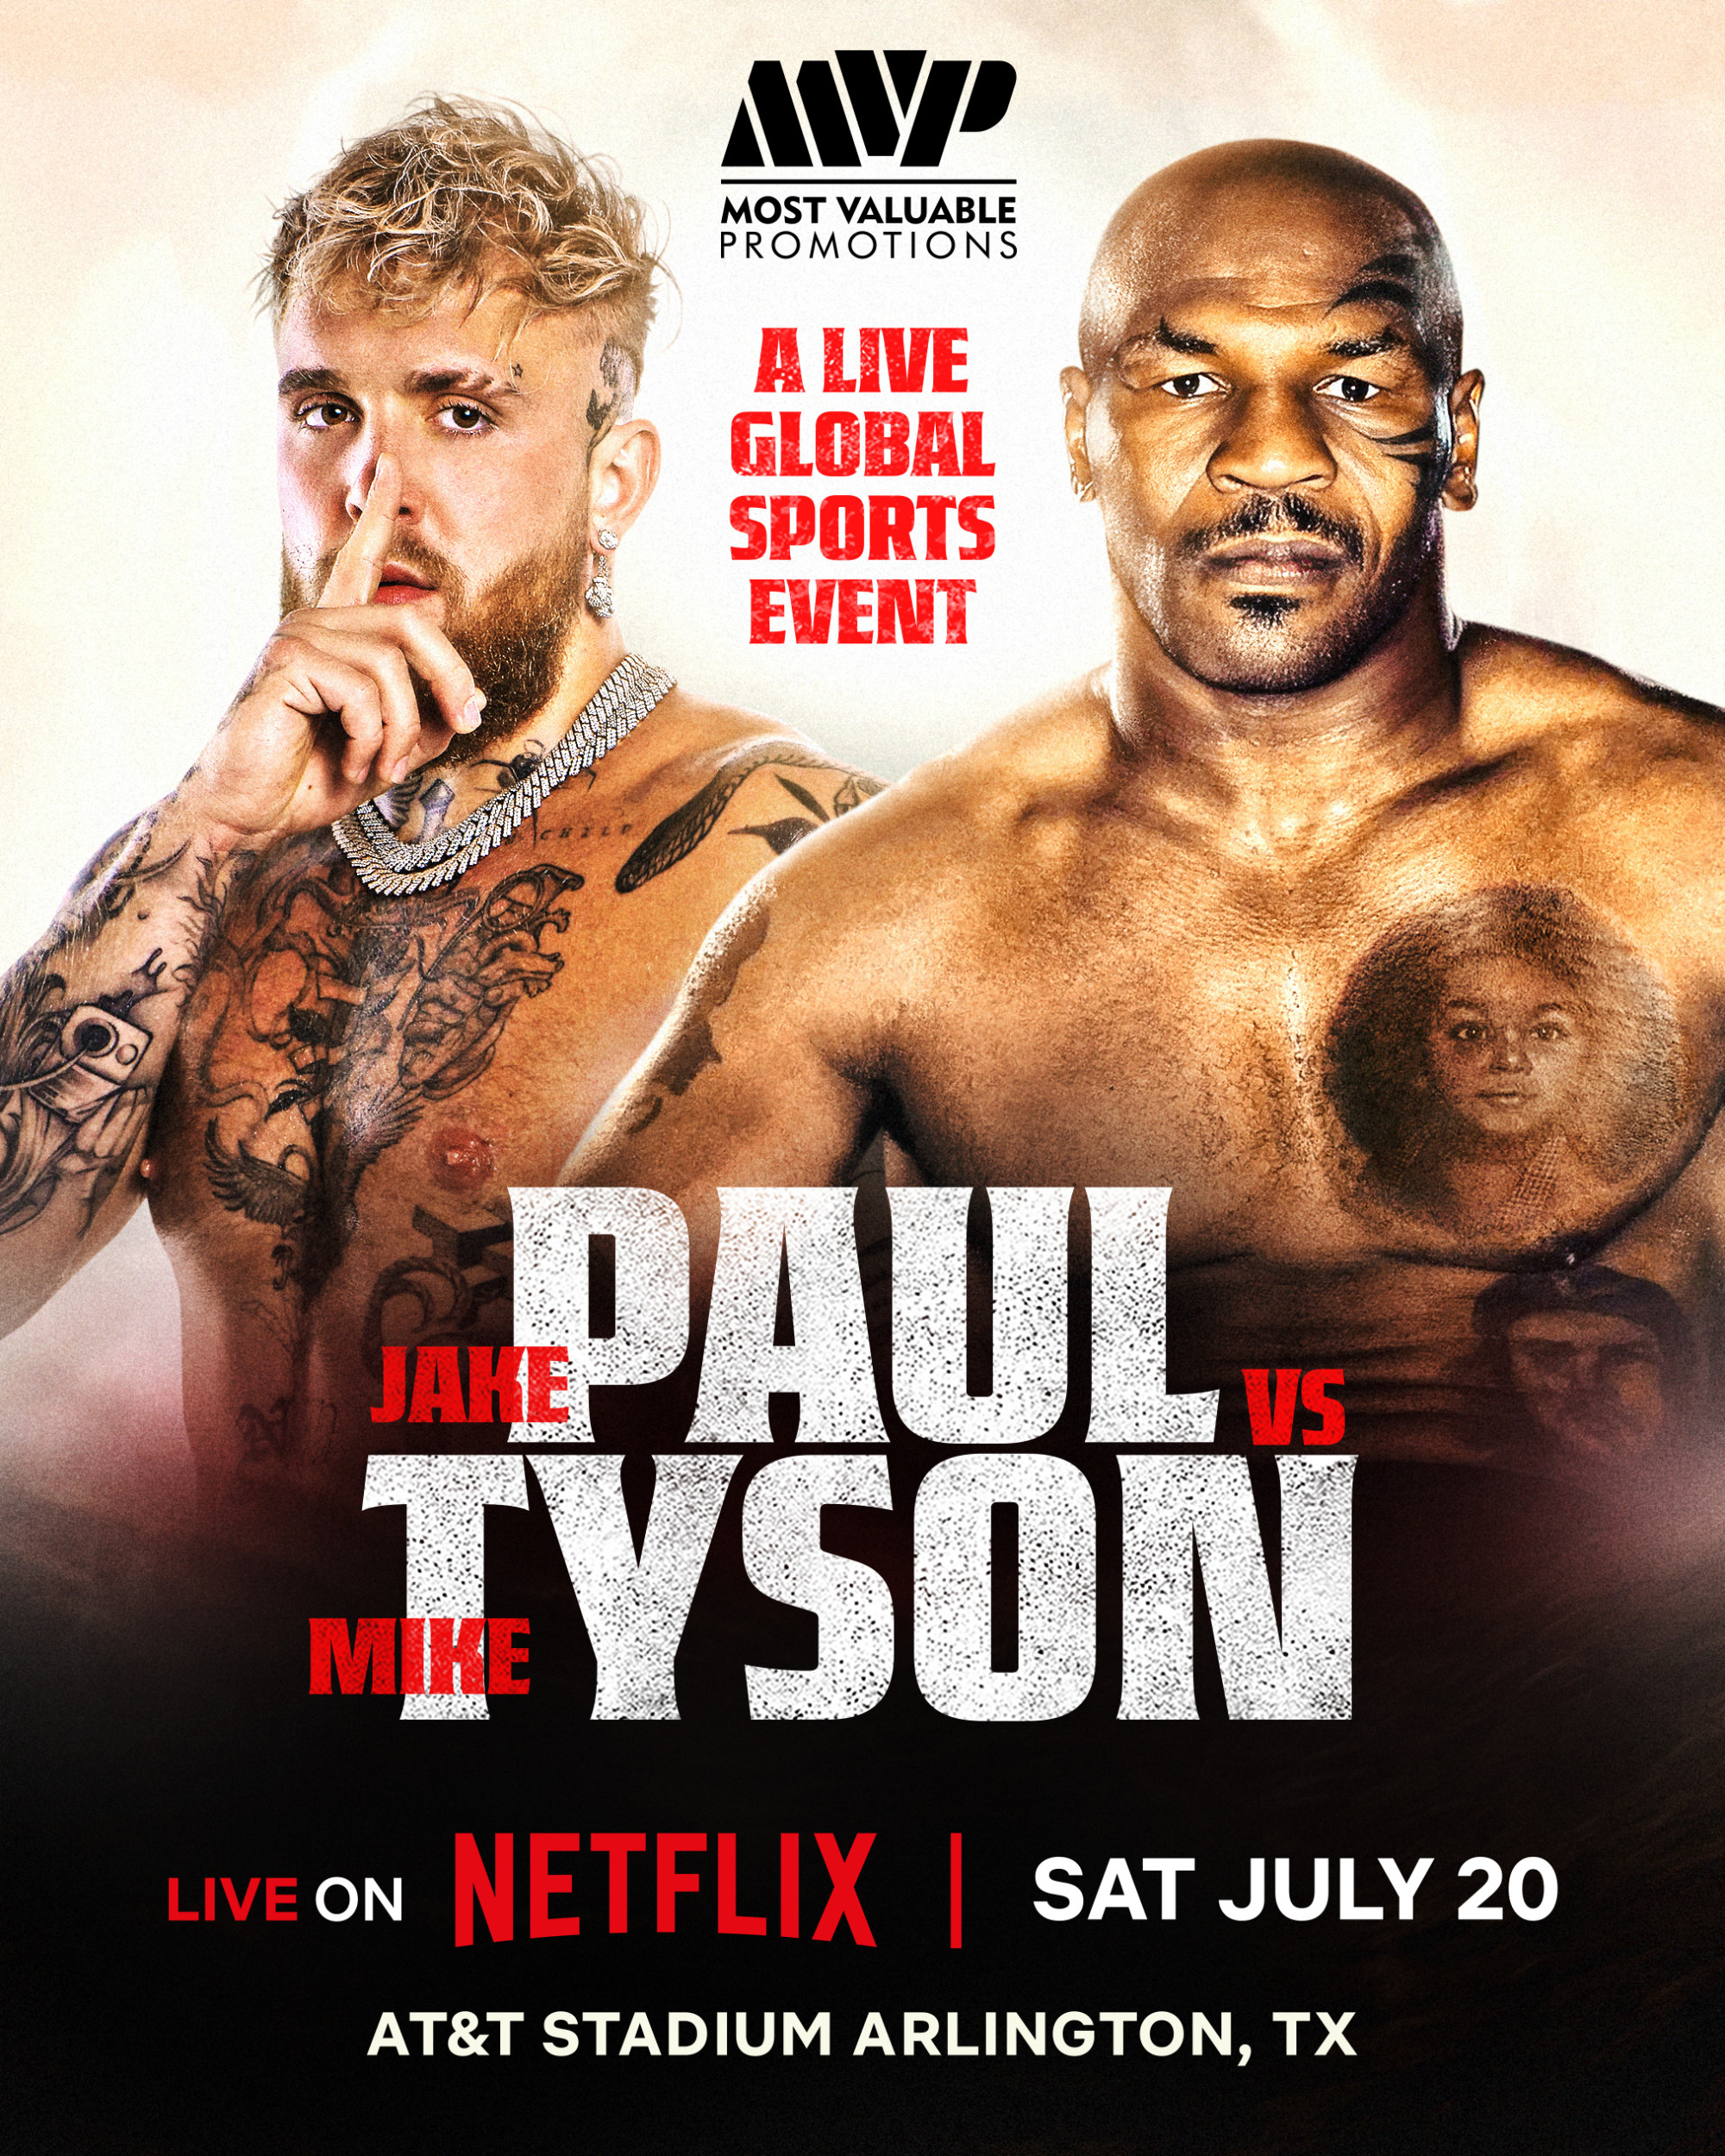 Netflix and Most Valuable Promotions Partner on Jake Paul vs. Mike Tyson, a Global Live Sports Event To Stream Exclusively on Netflix on Saturday July 20 - About Netflix